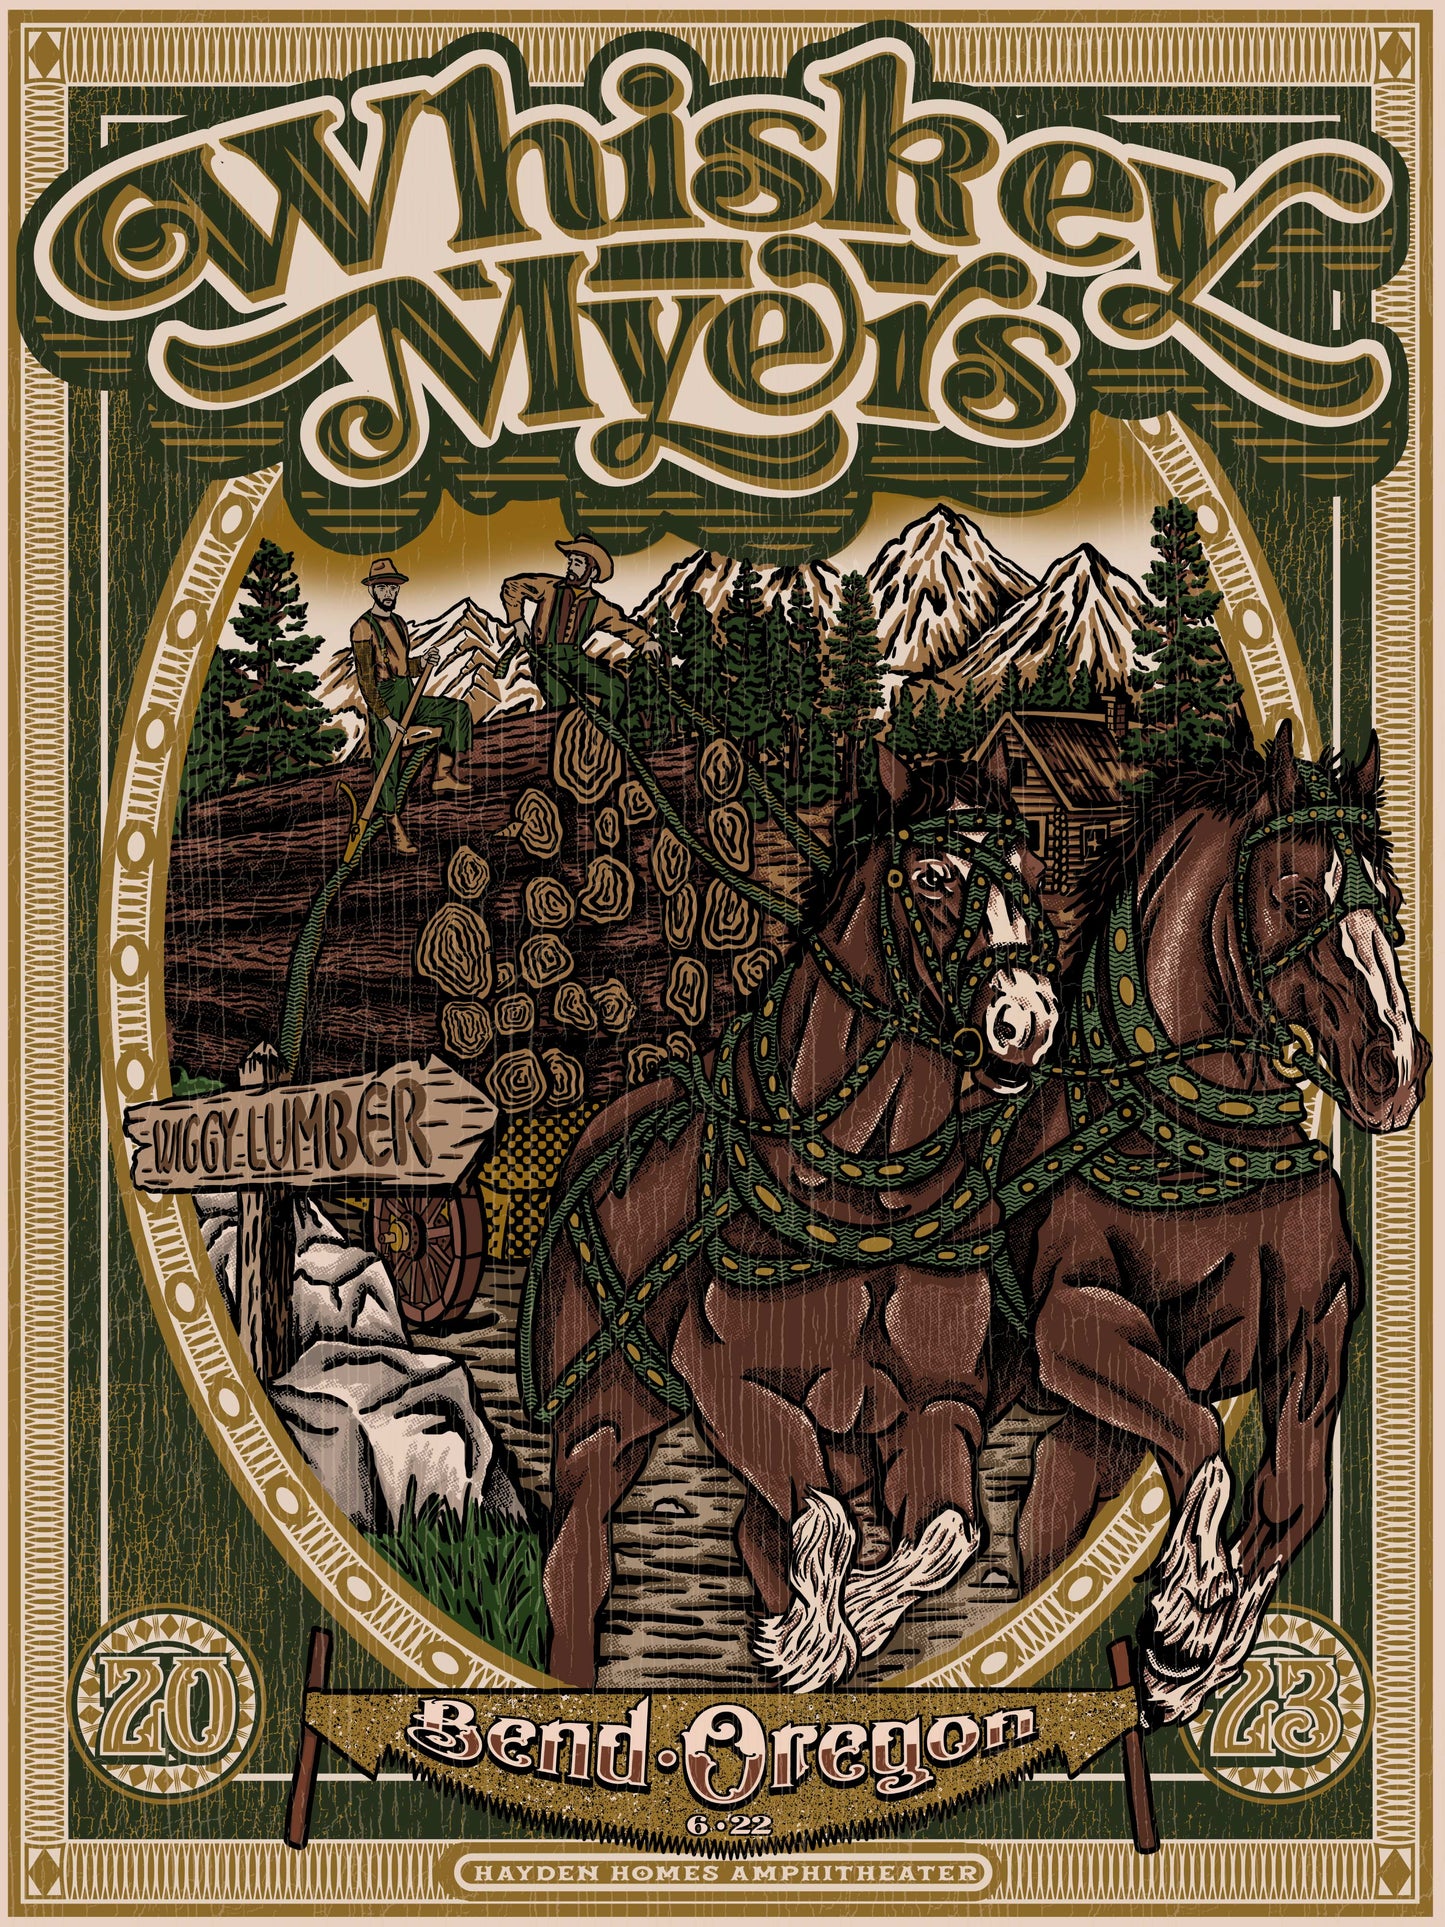 C19 | WHISKEY MYERS | BEND | SHOW